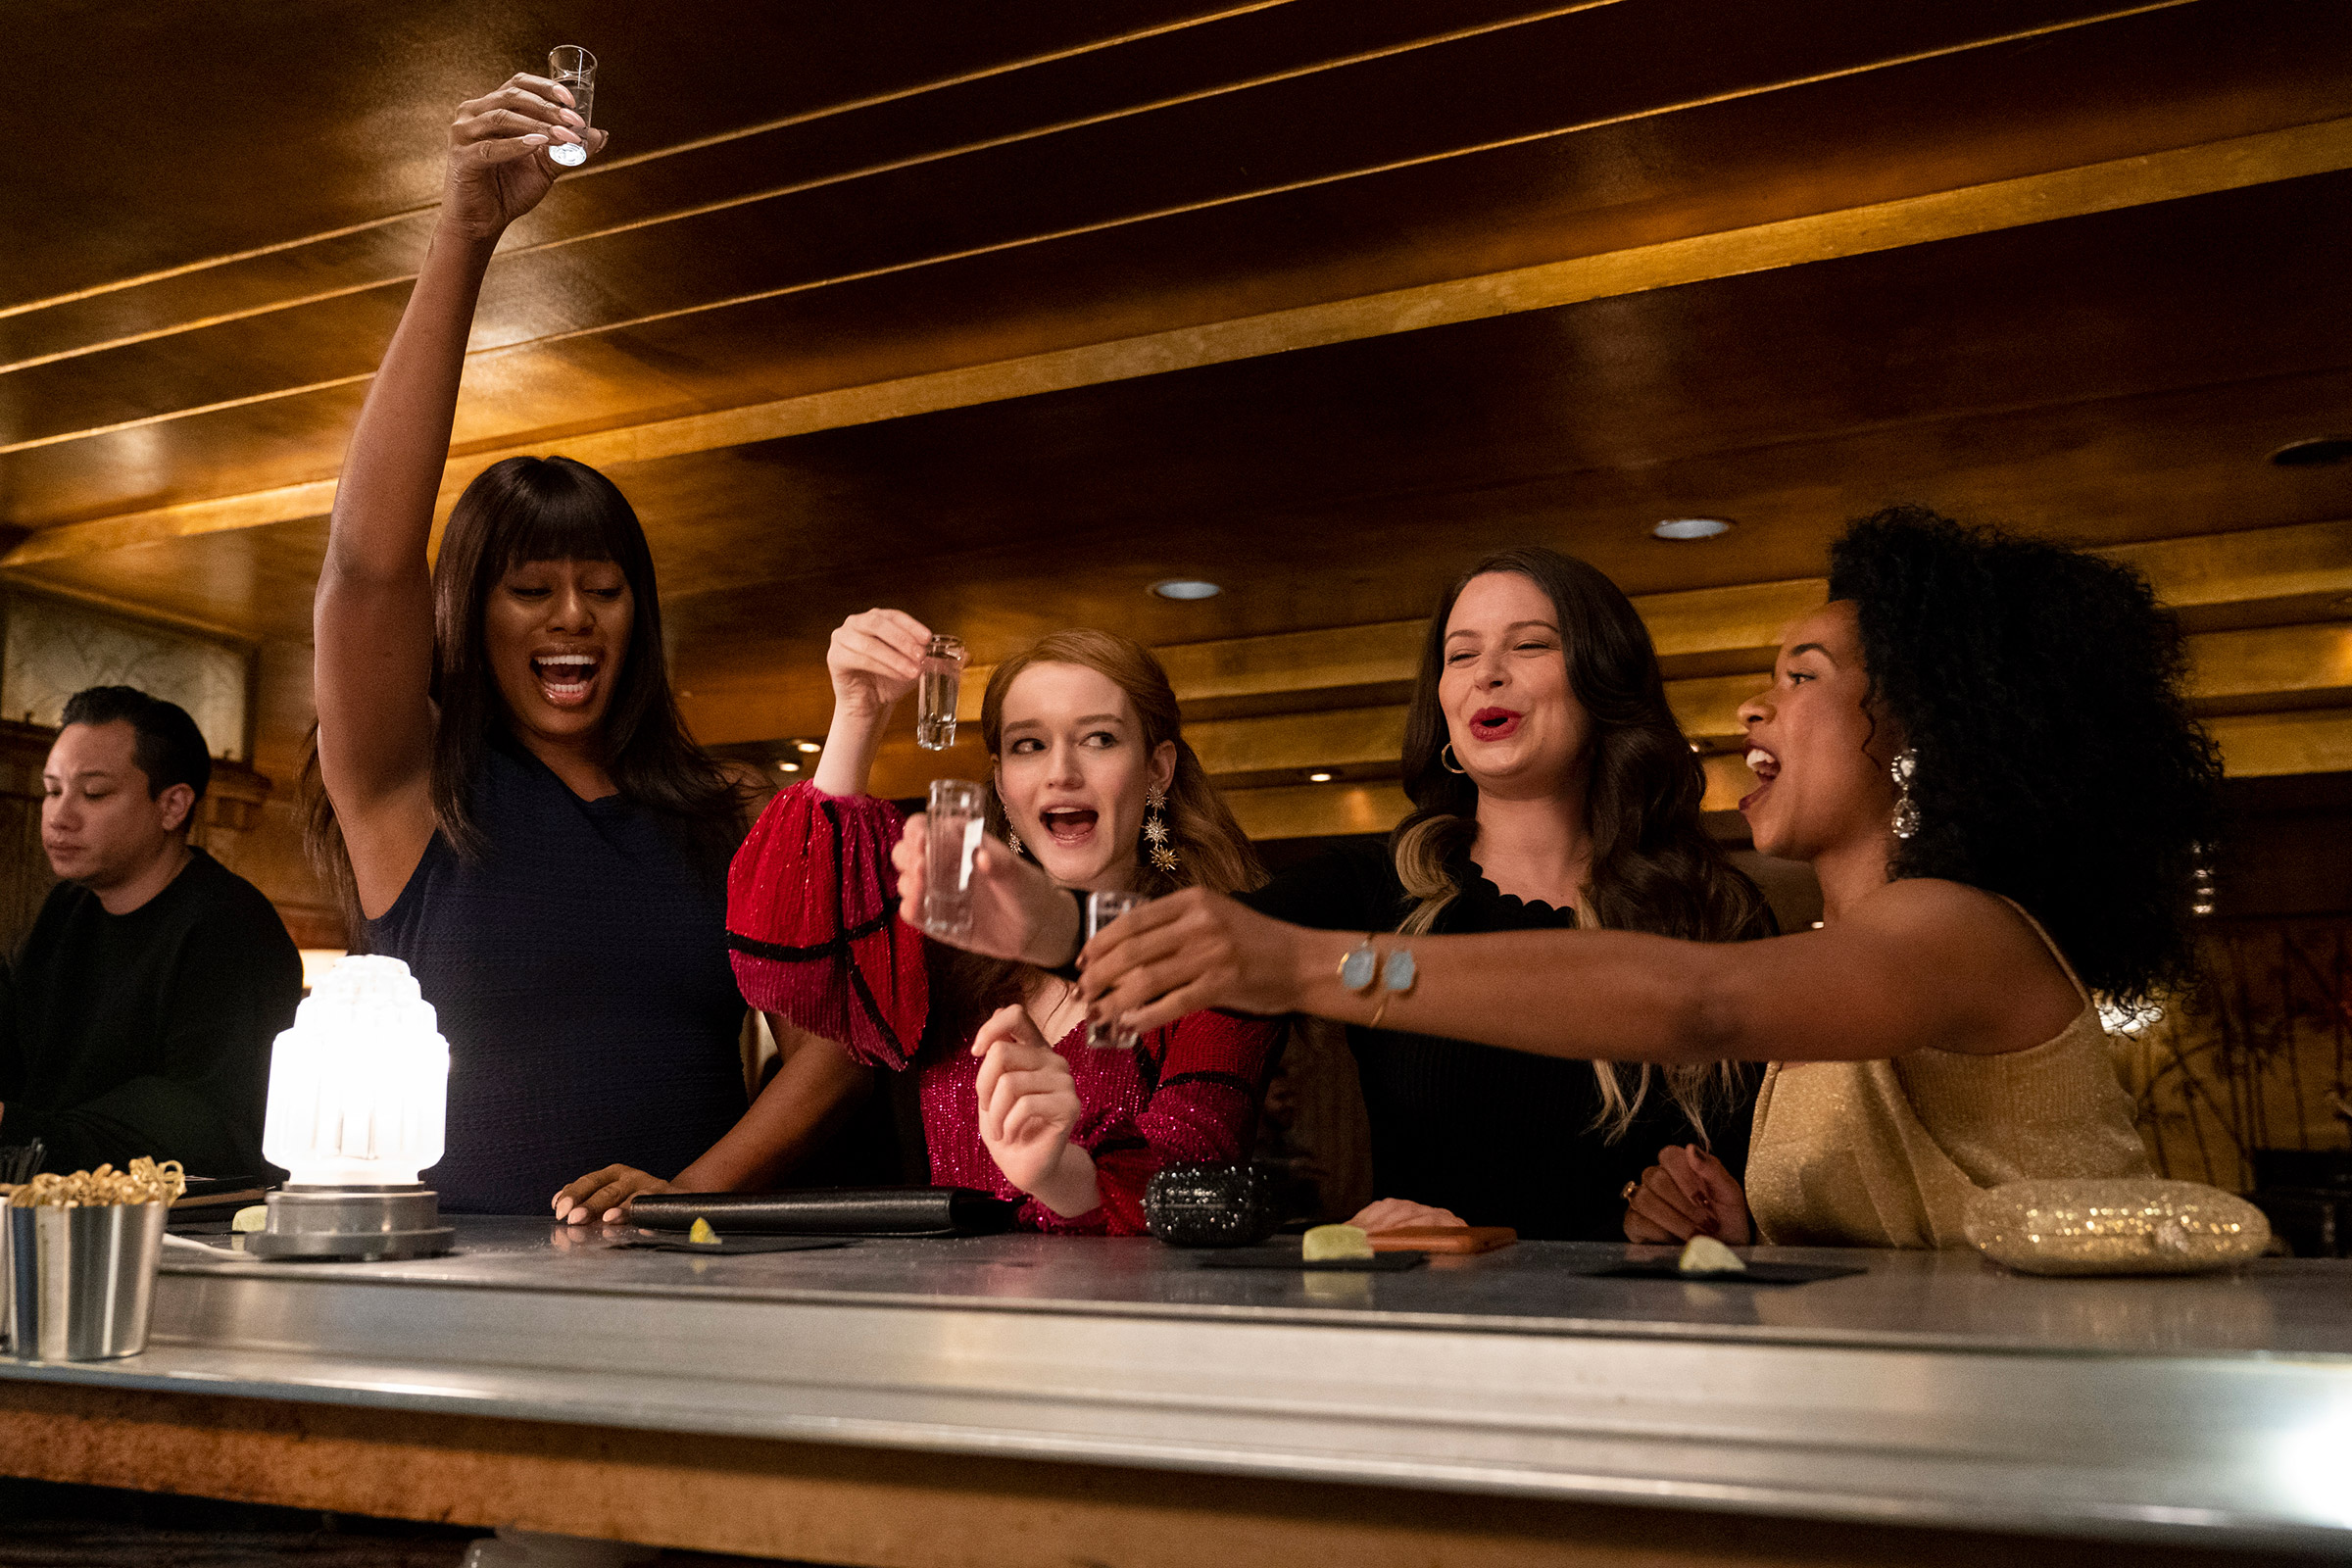 'Inventing Anna' stars Julia Garner as Anna Sorokin (second from left), with Laverne Cox (far left), Katie Lowes (center right) and Alexis Floyd (far right) as real-life women whom Sorokin befriended. (Aaron Epstein—Netflix)